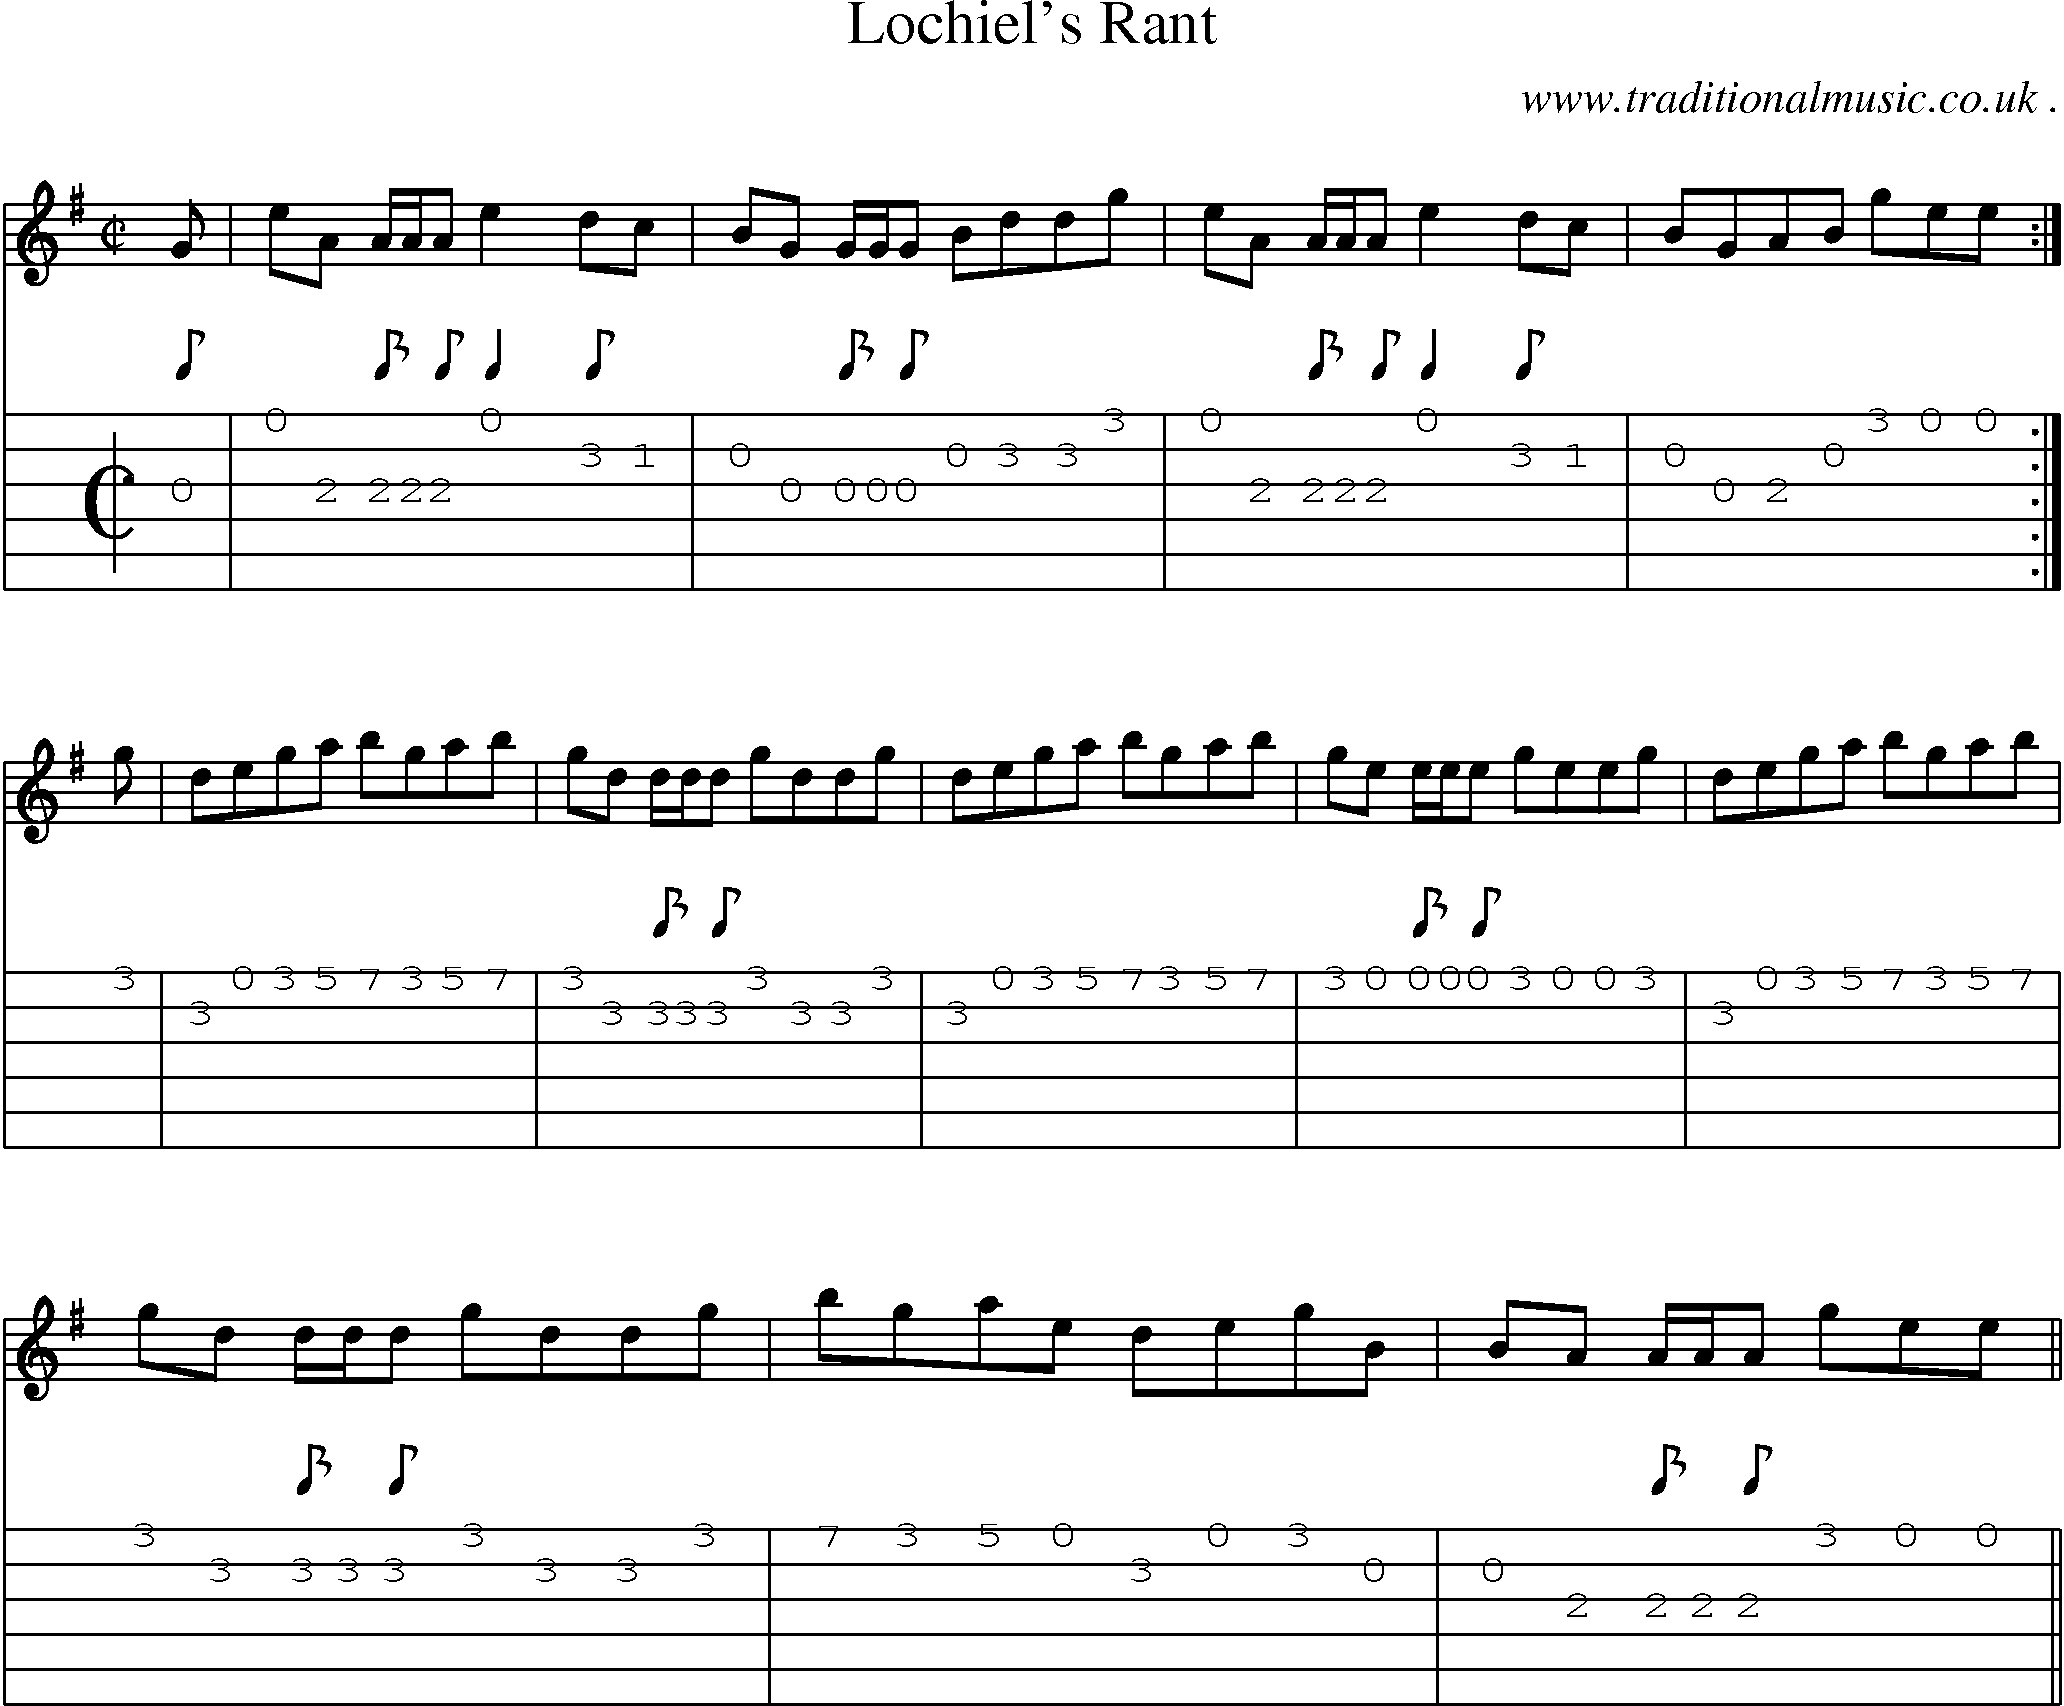 Sheet-music  score, Chords and Guitar Tabs for Lochiels Rant